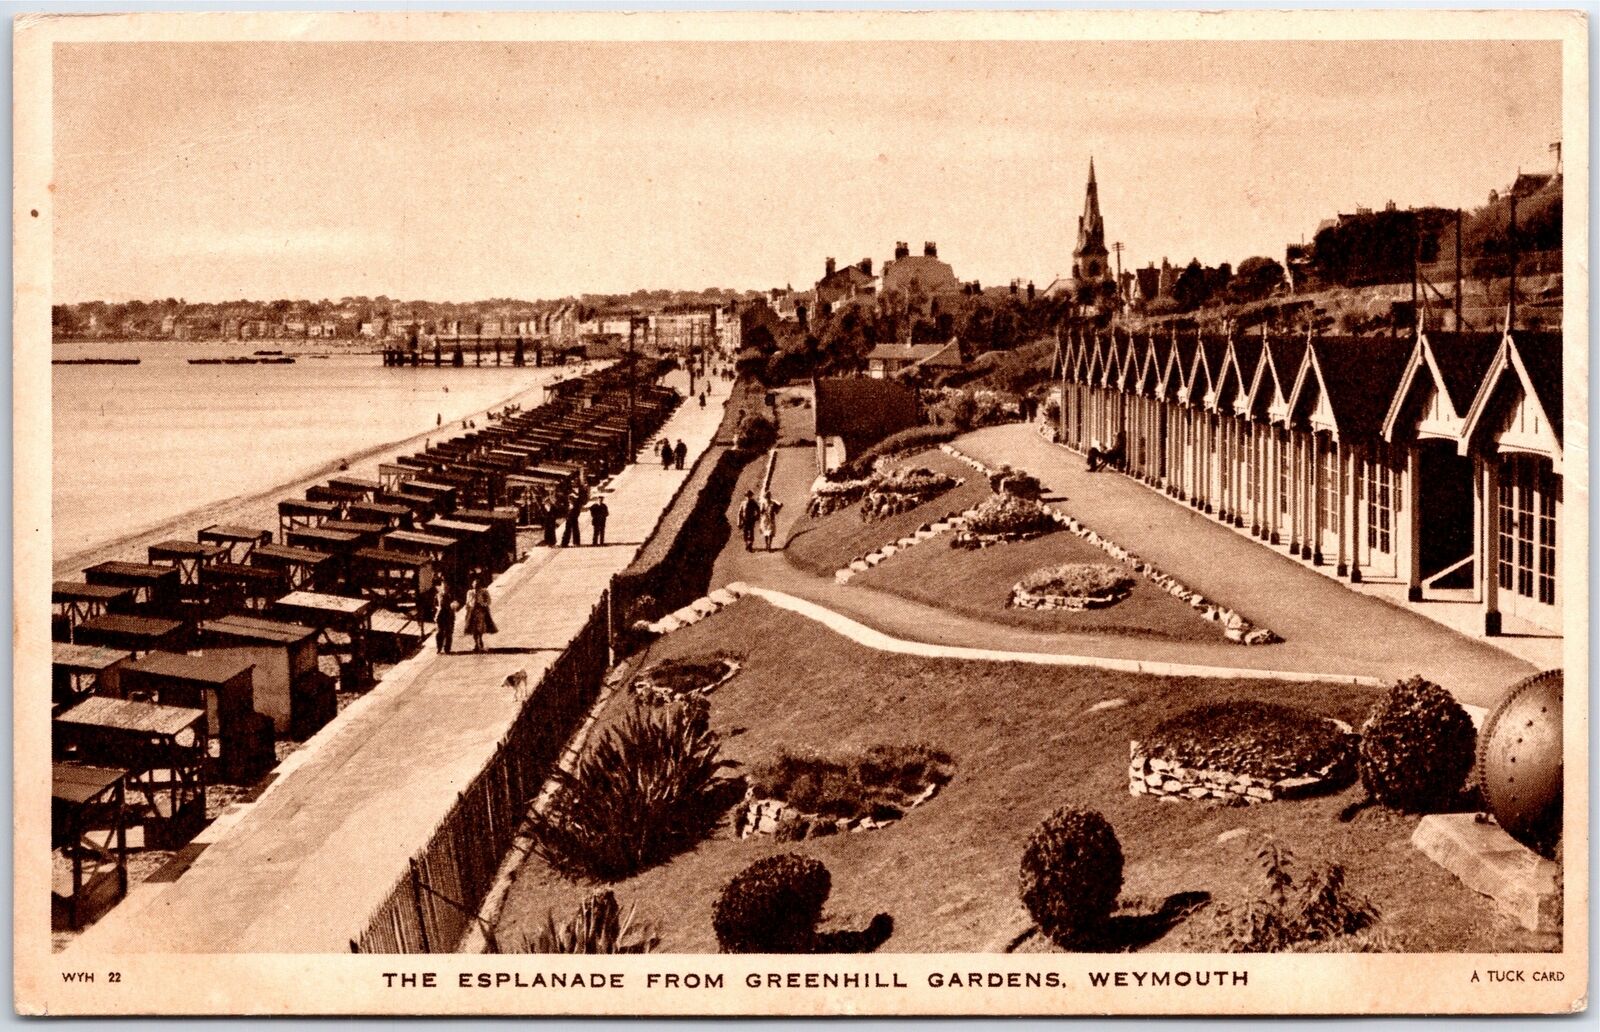 VINTAGE POSTCARD VIEW OF THE ESPLANADE FROM GREENHILL GARDENS WEYMOUTH ENGLAND